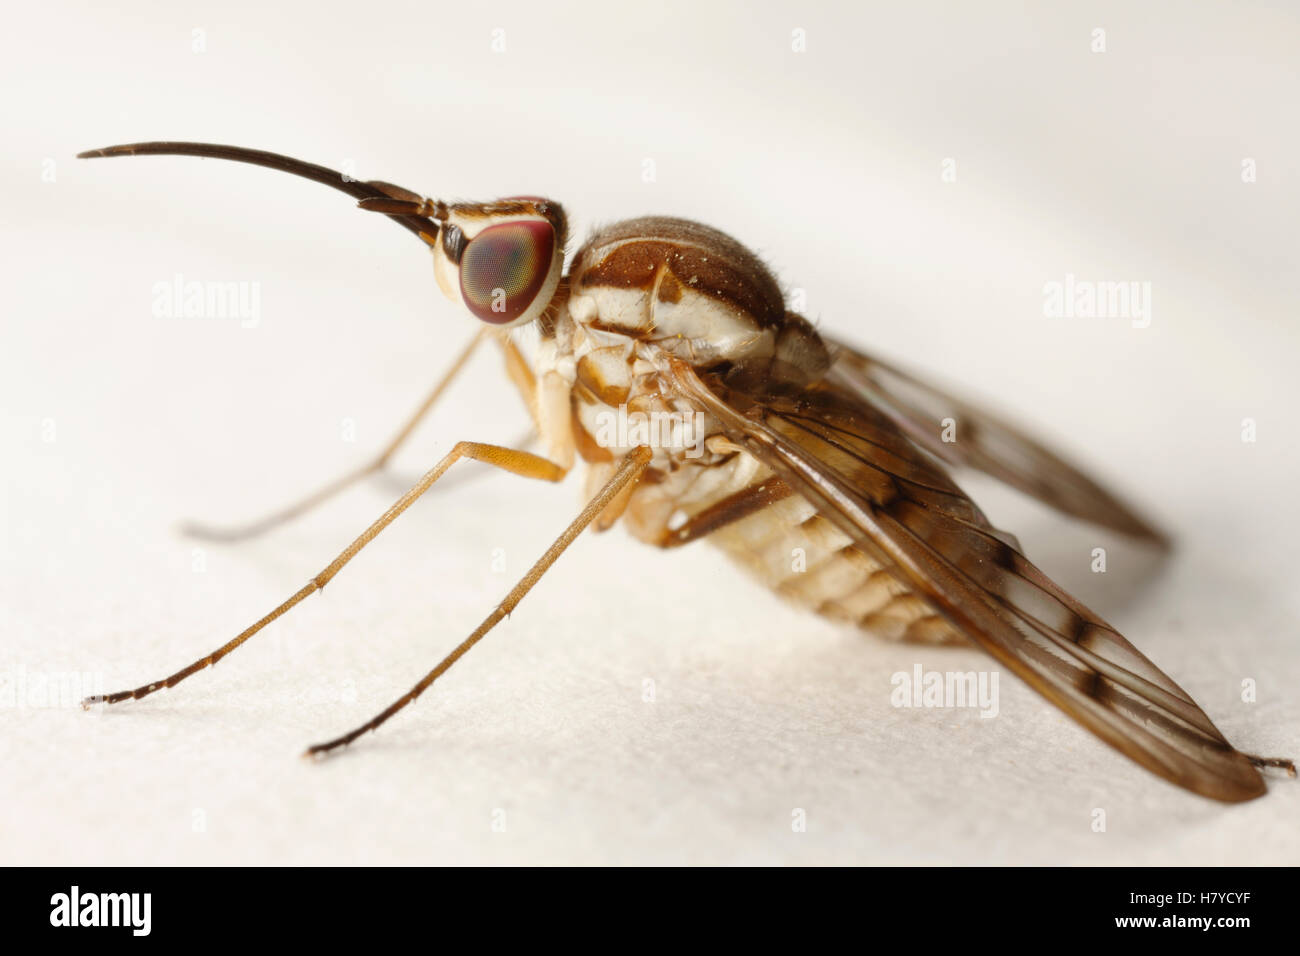 Stable Fly (Muscidae) with extended proboscis, southern Texas Stock Photo